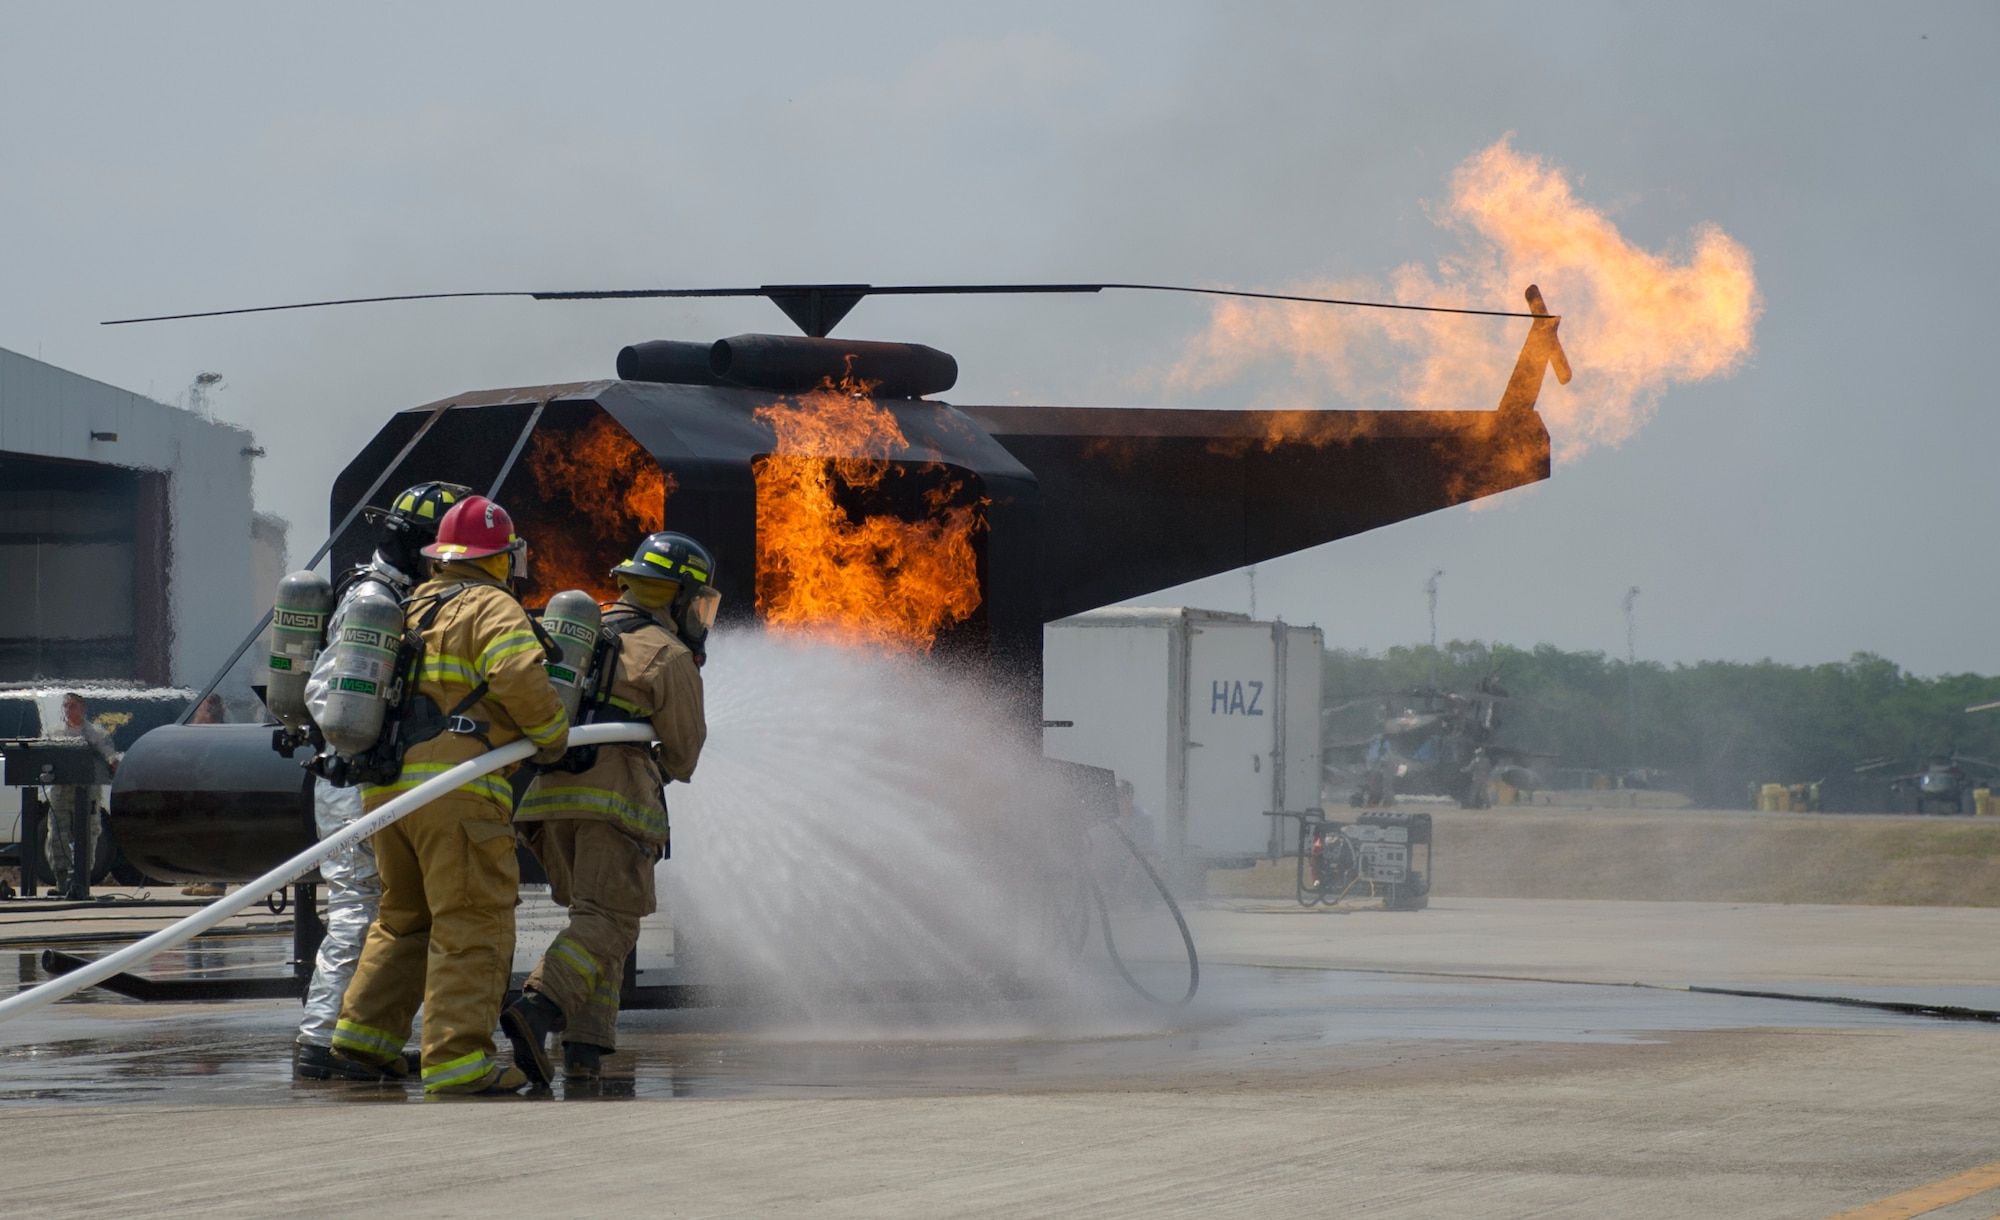 Firefighters participate in live-fire training during a weeklong exercise at Soto Cano Air Base, Honduras, April 20, 2016. Joint Task Force-Bravo hosted firefighters from Belize, Guatemala, El Salvador, Honduras, Nicaragua, Costa Rica, and Panama for the Central America Sharing Mutual Operational Knowledge and Experience exercise April 18-22. (U.S. Air Force photo/Capt. David Liapis)